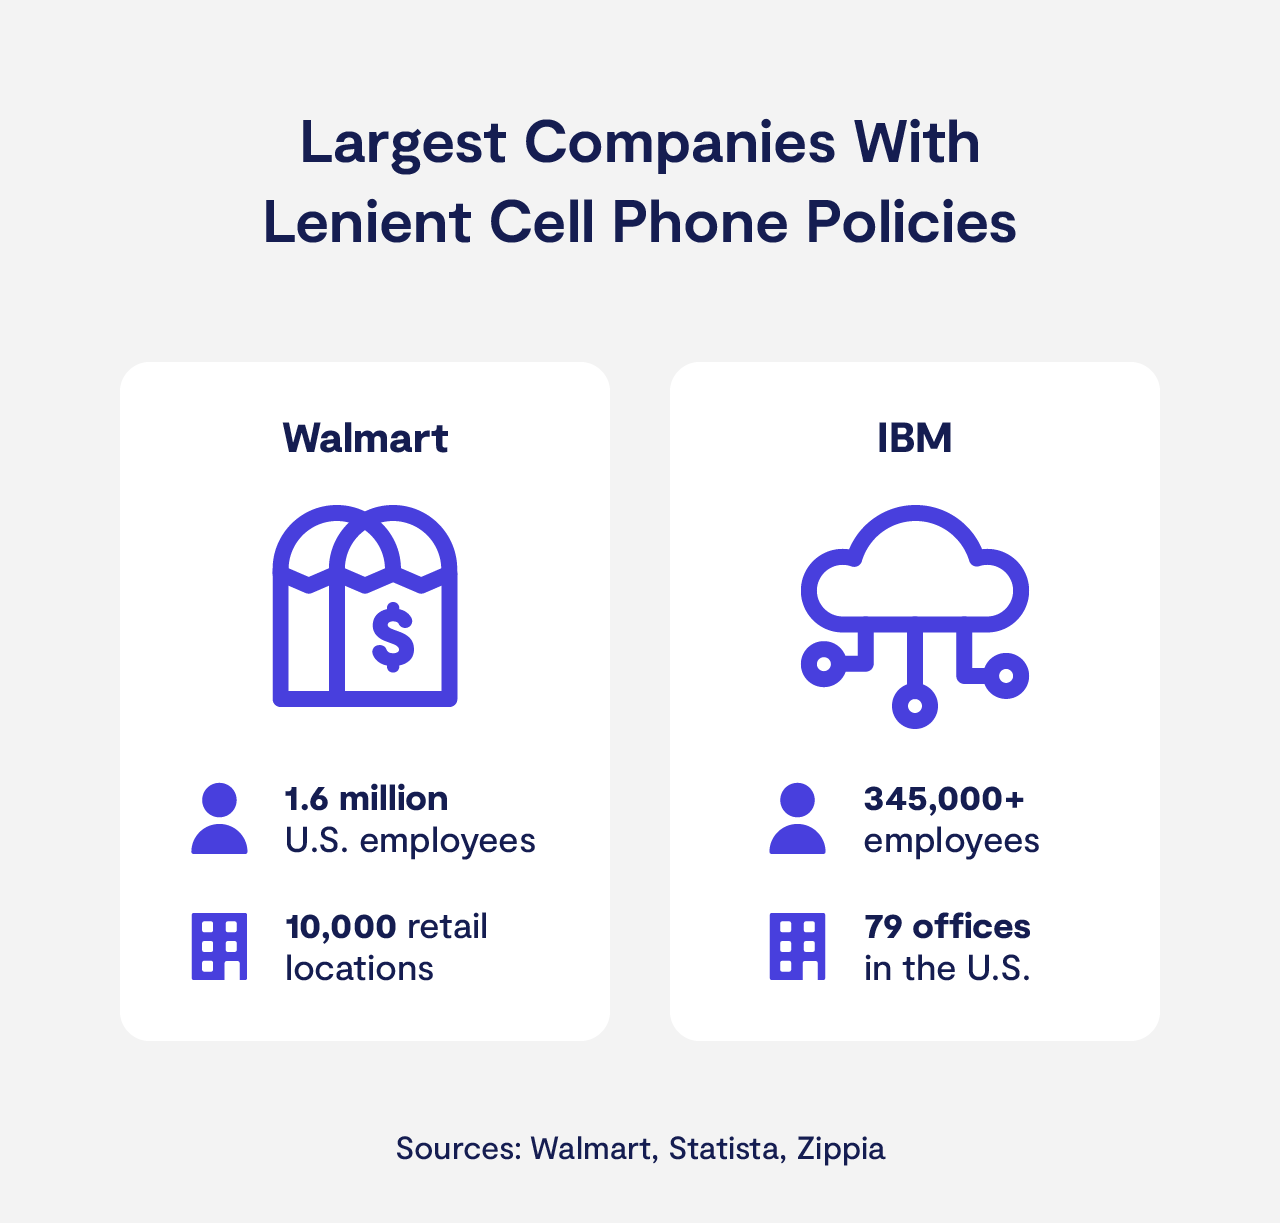 Walmart and IBM have lenient cell phone policies